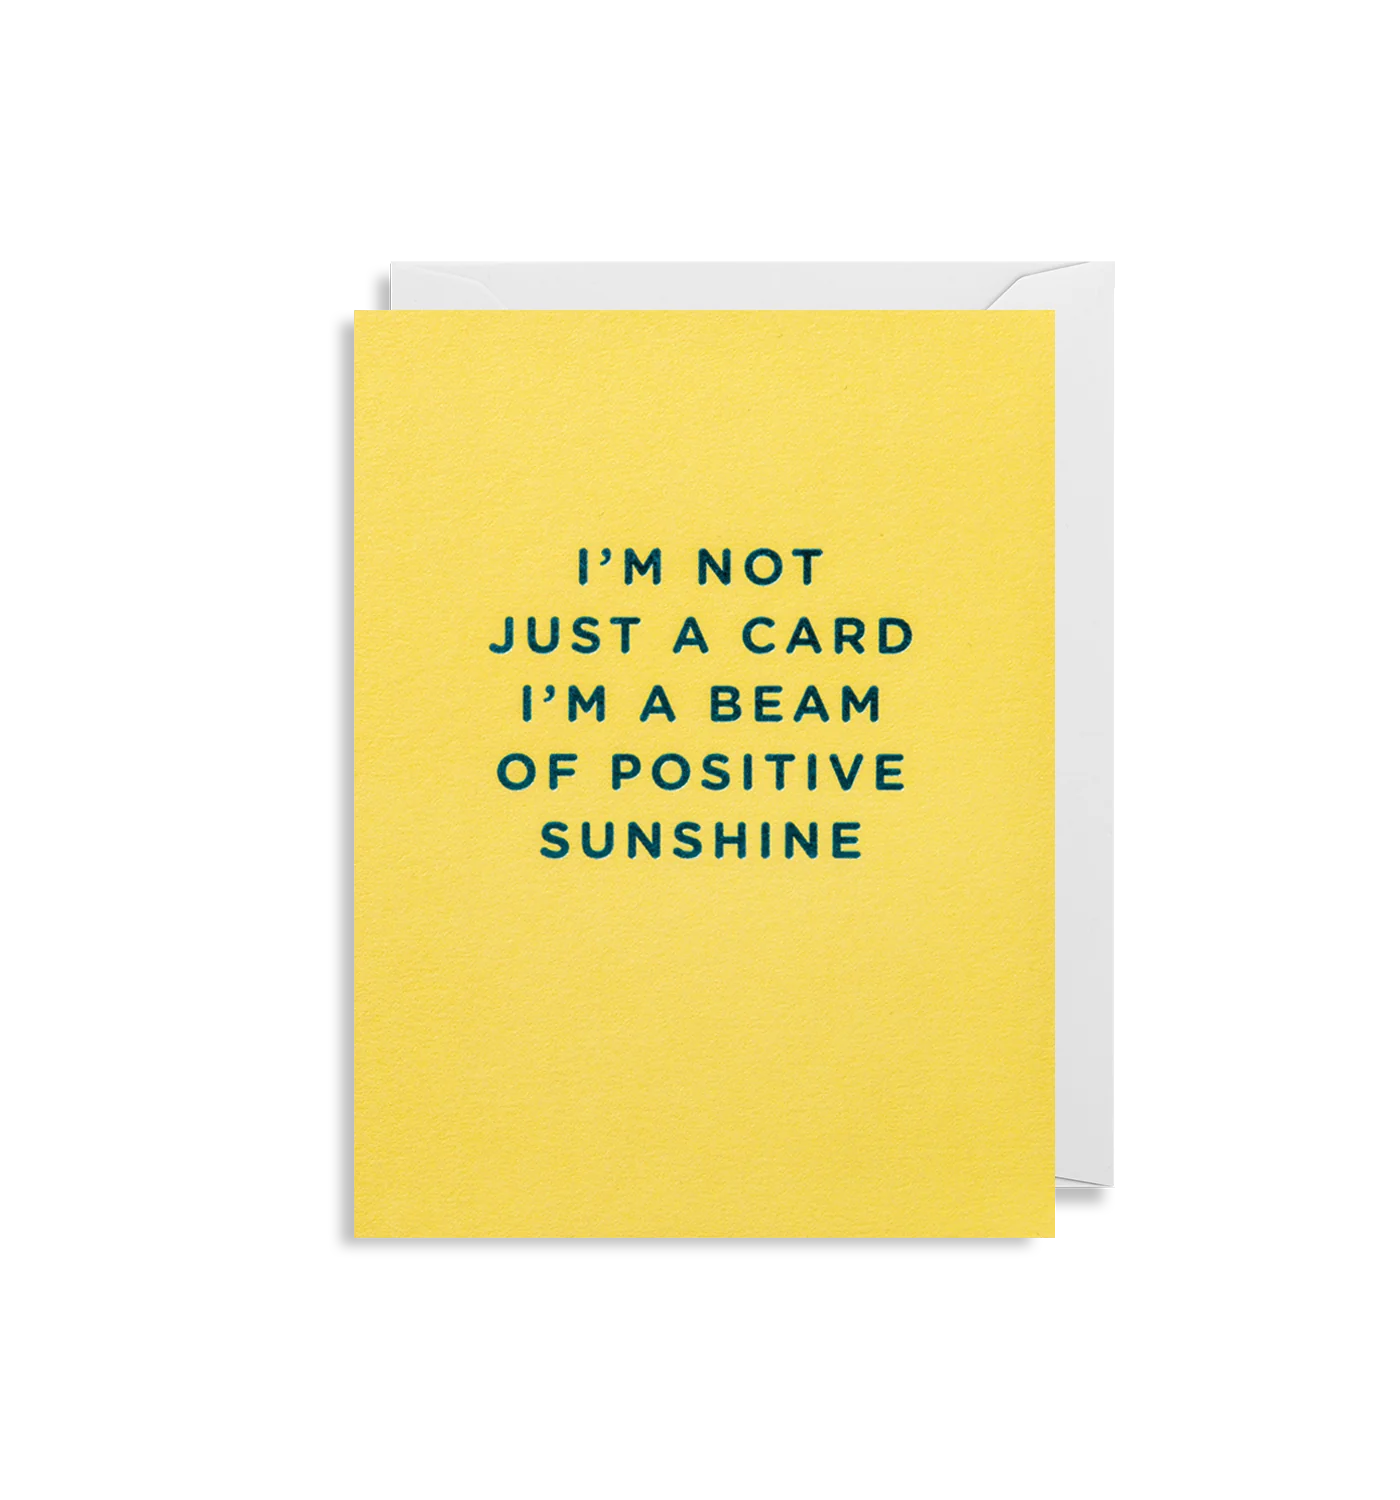 I’m Not Just a Card I'm a Beam of Positive Sunshine